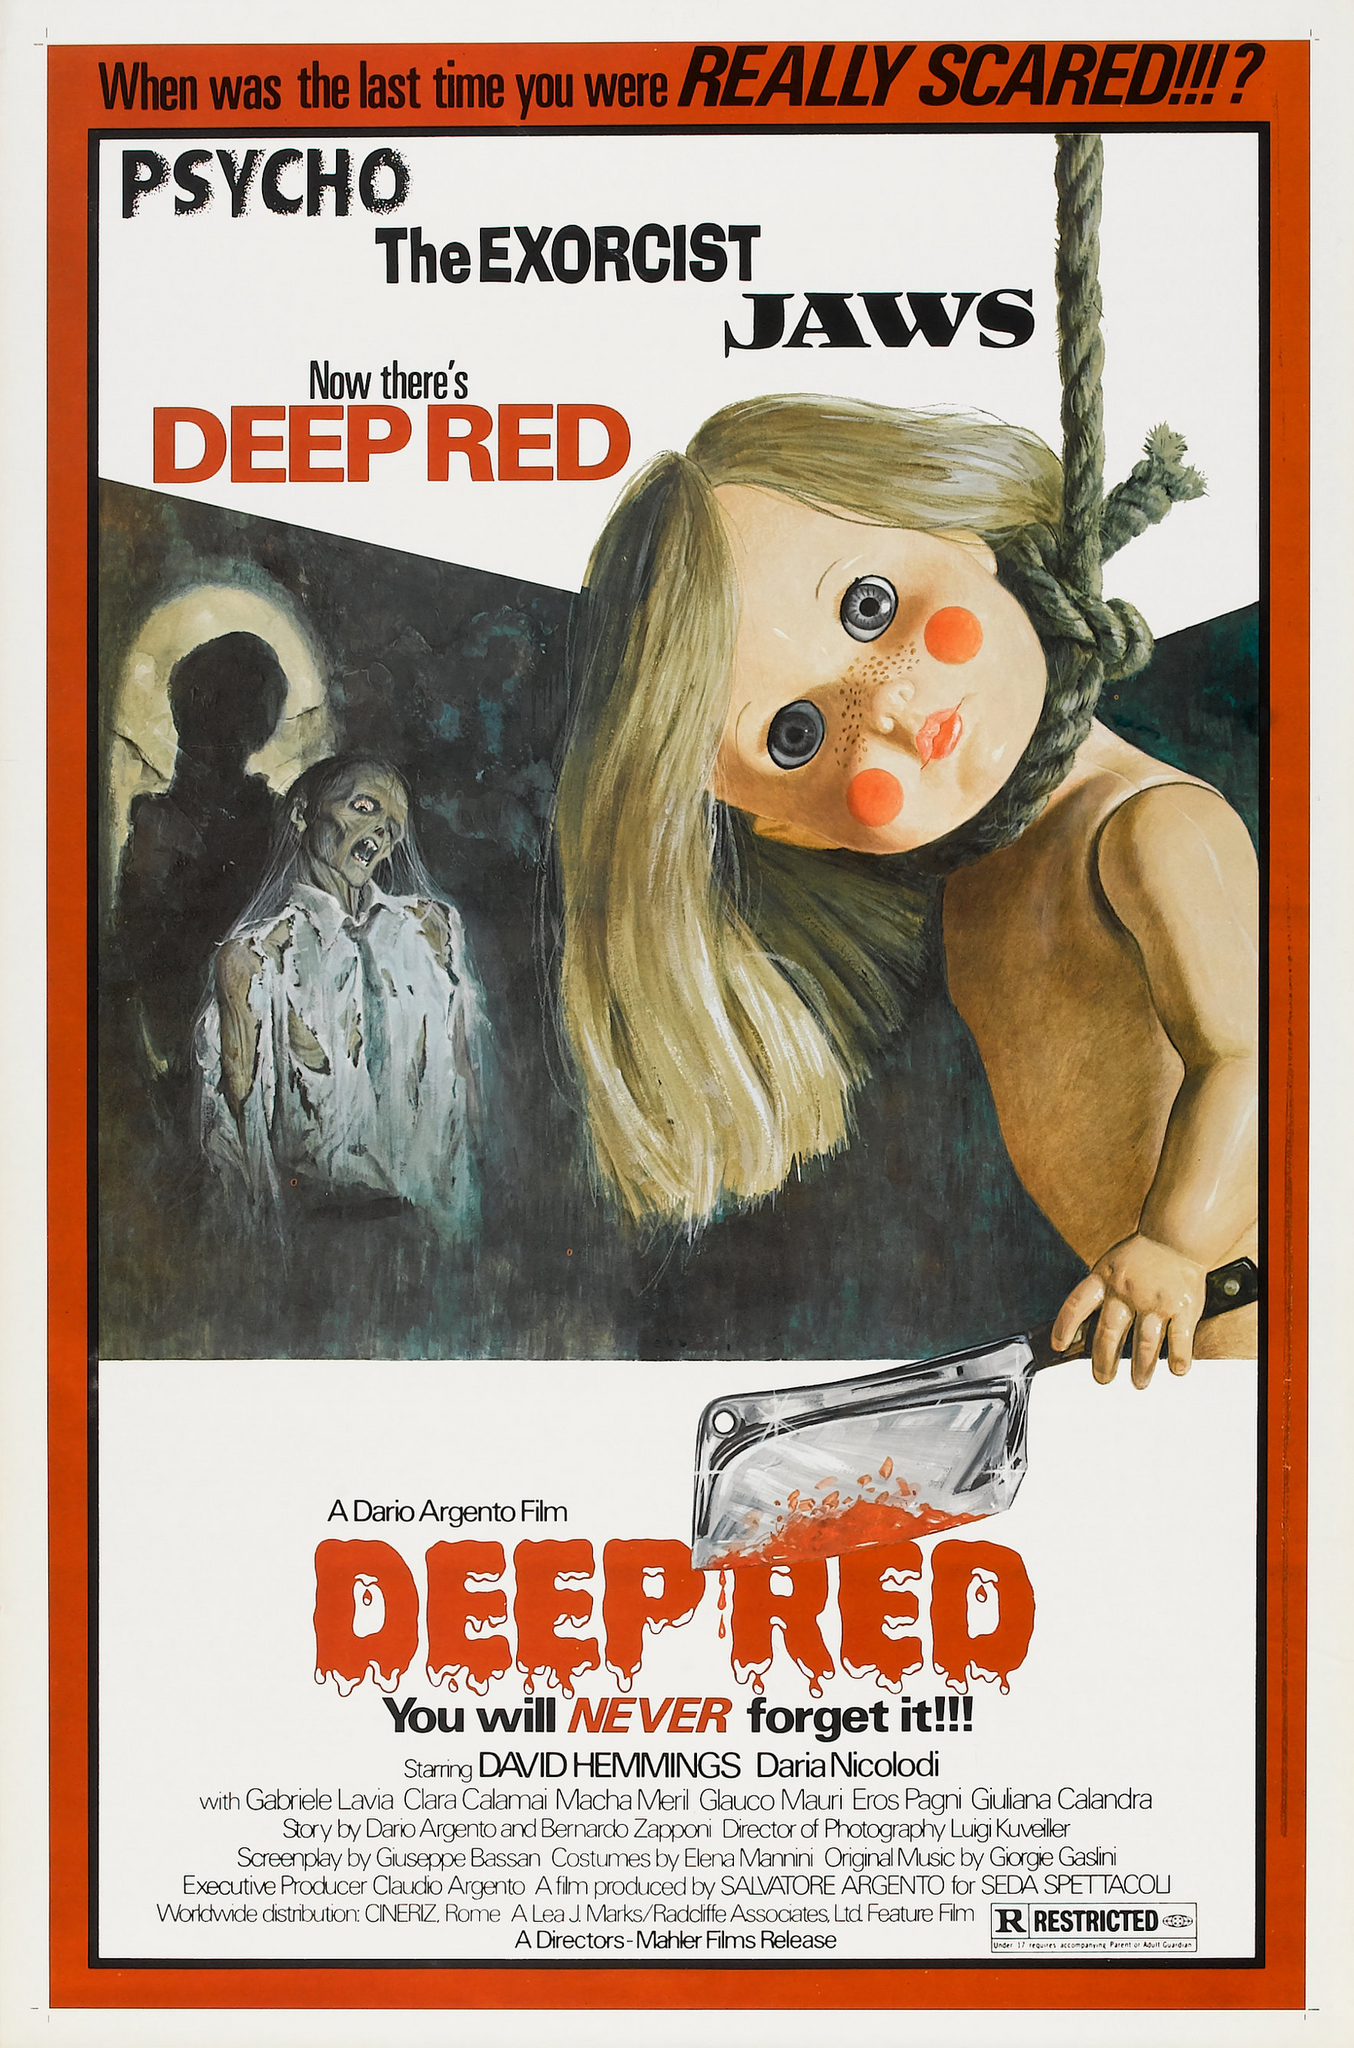 DARIO ARGENTO "DEEP RED" LIMITED EDITION SILK SCREENED POSTER - USA VERSION